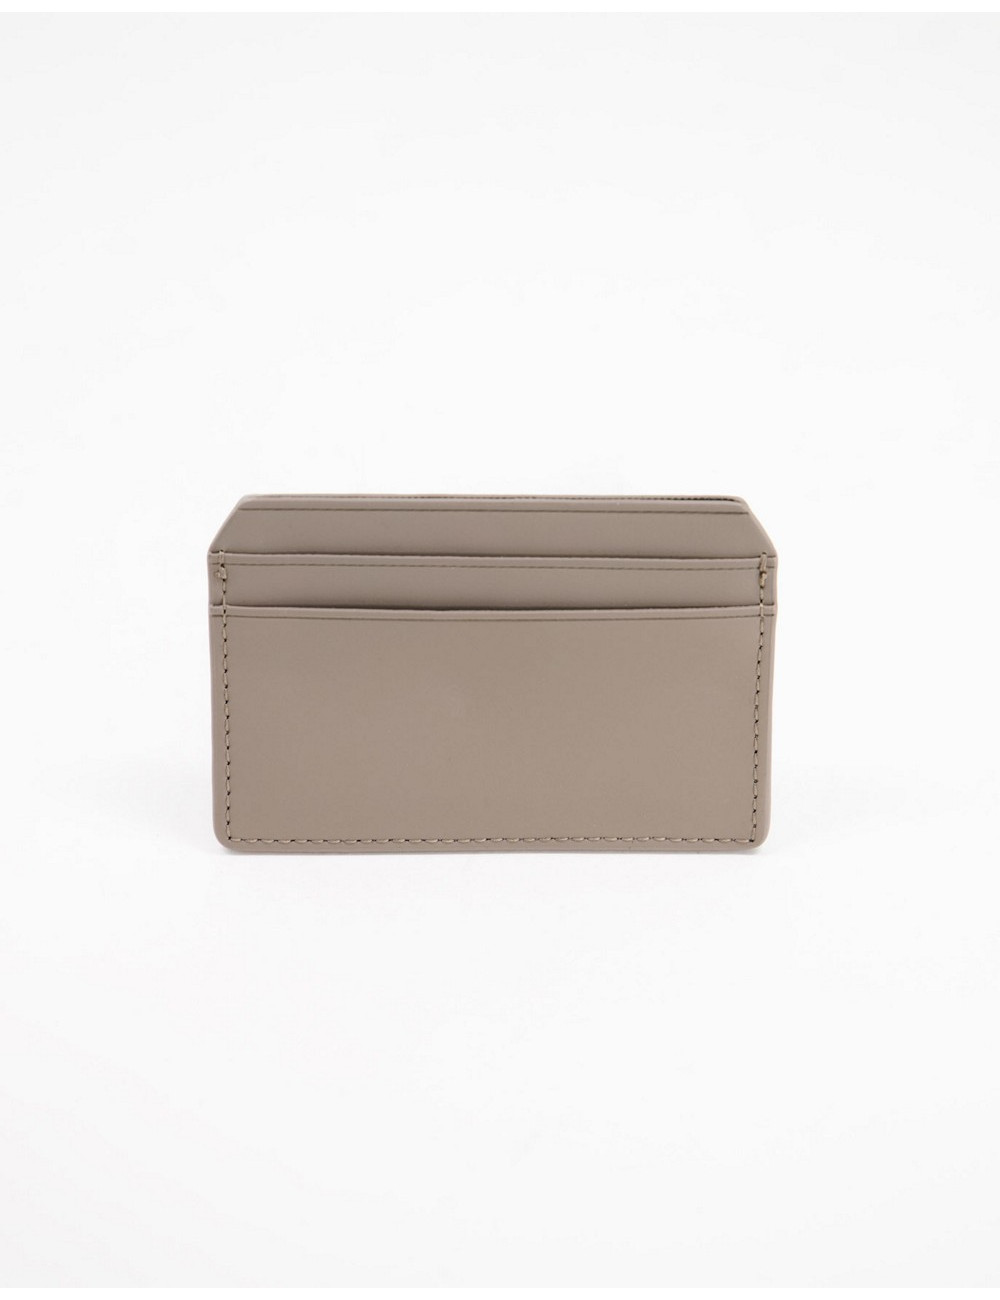 Rains 1624 cardholder in taupe